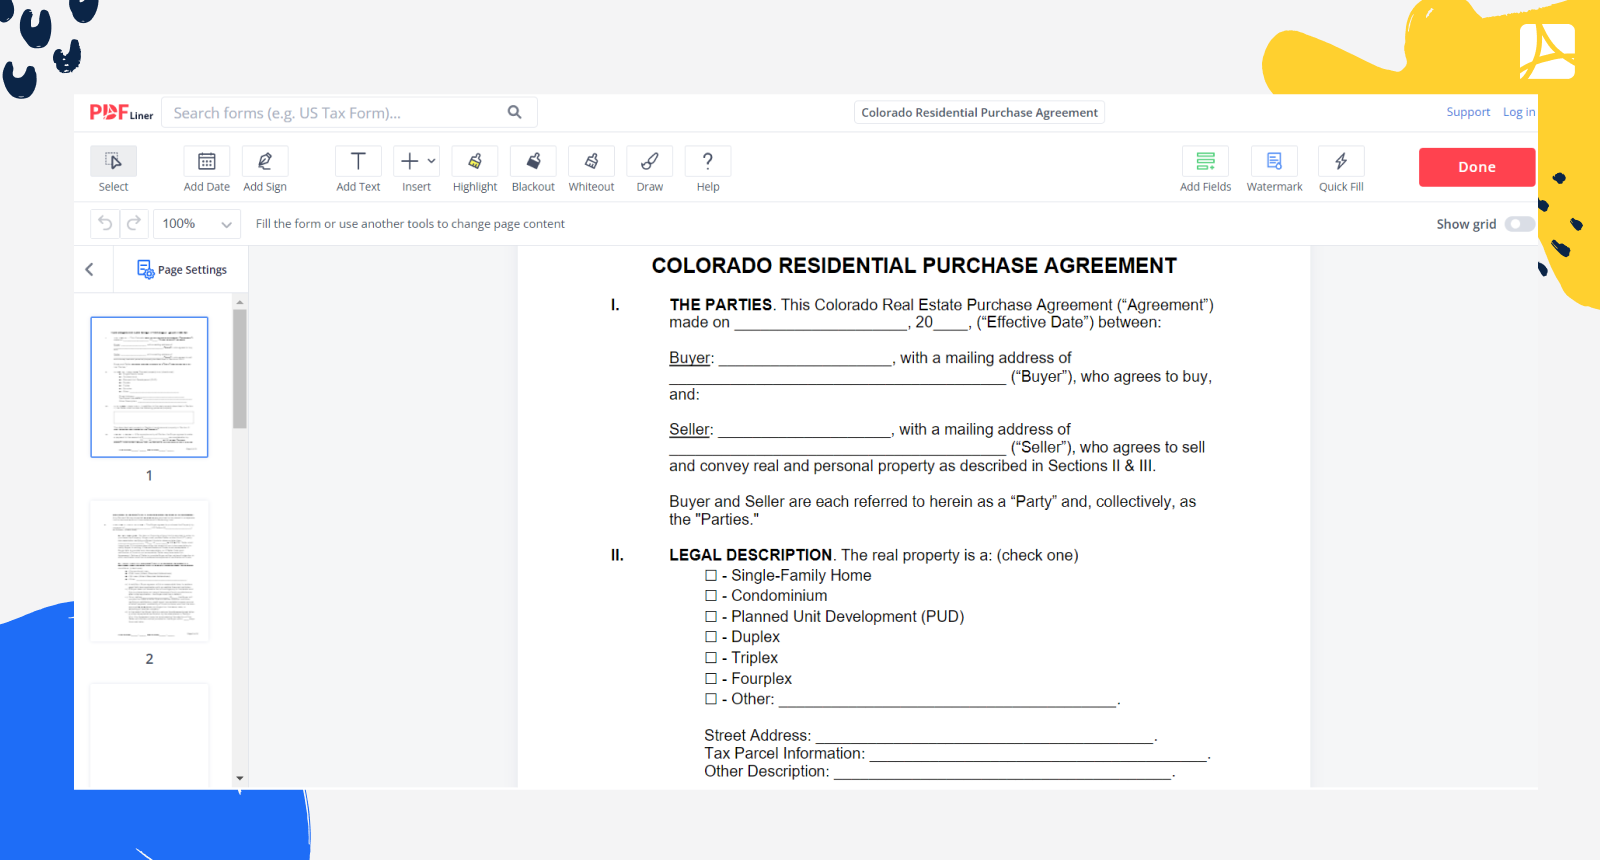 Colorado Residential Purchase Agreement Form Screenshot